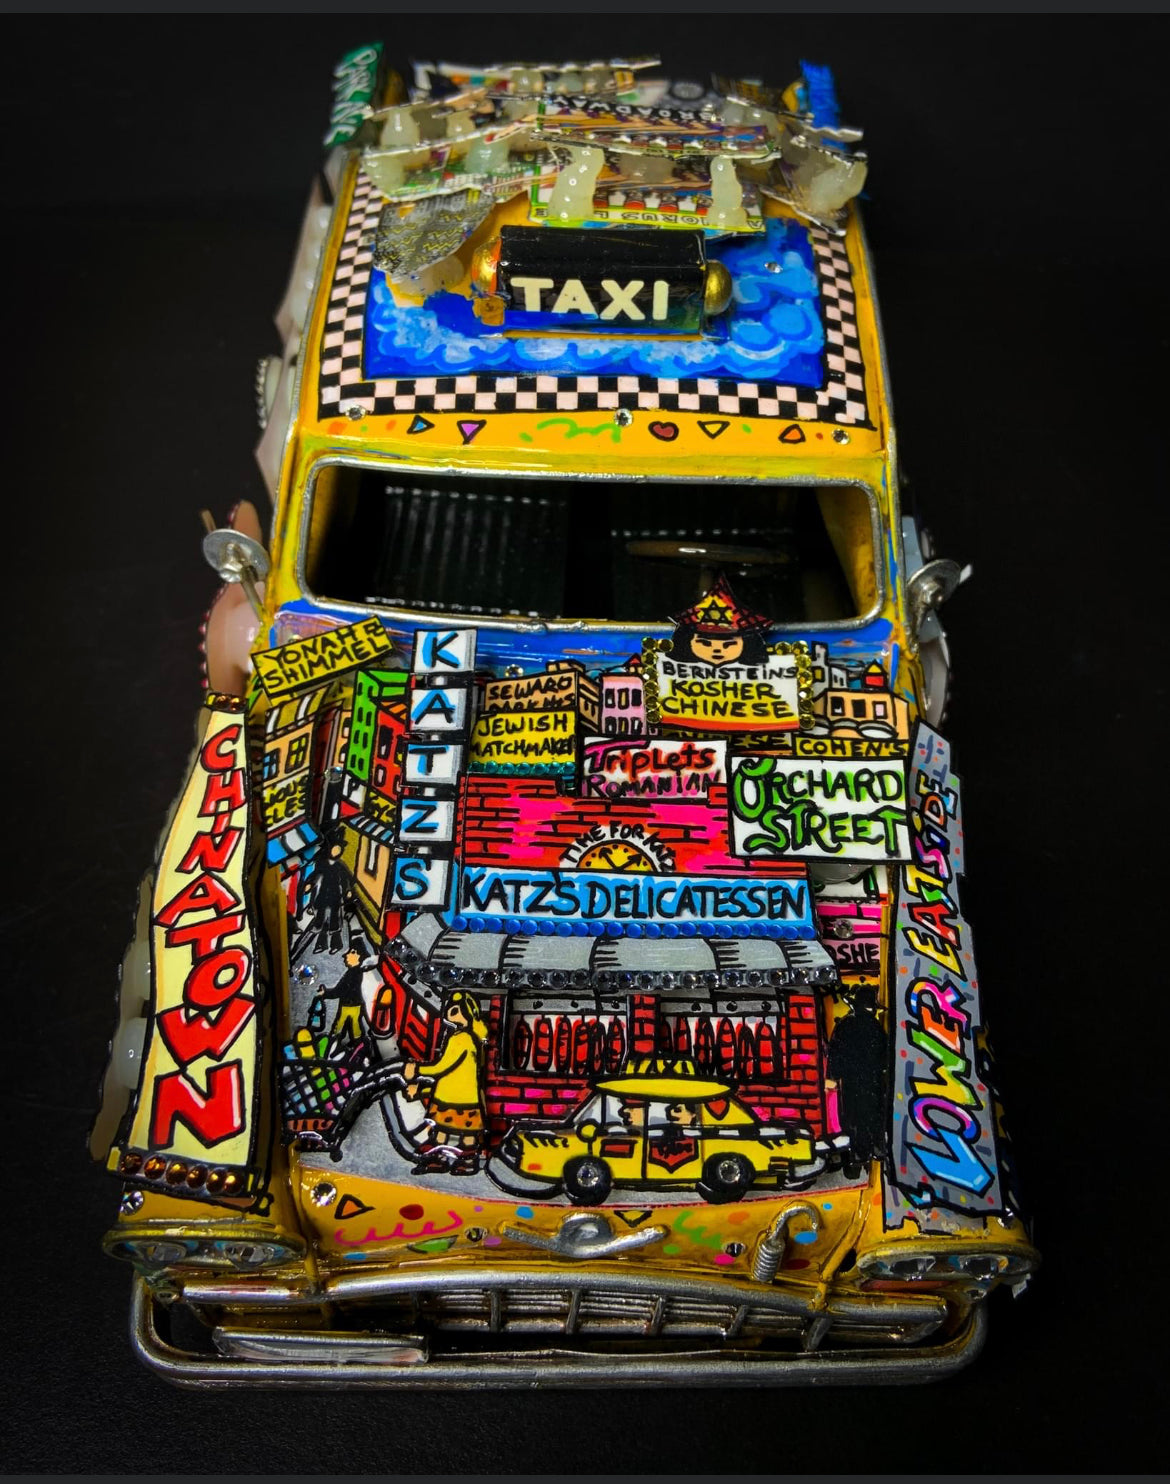 The Broadway Taxi Sculpture